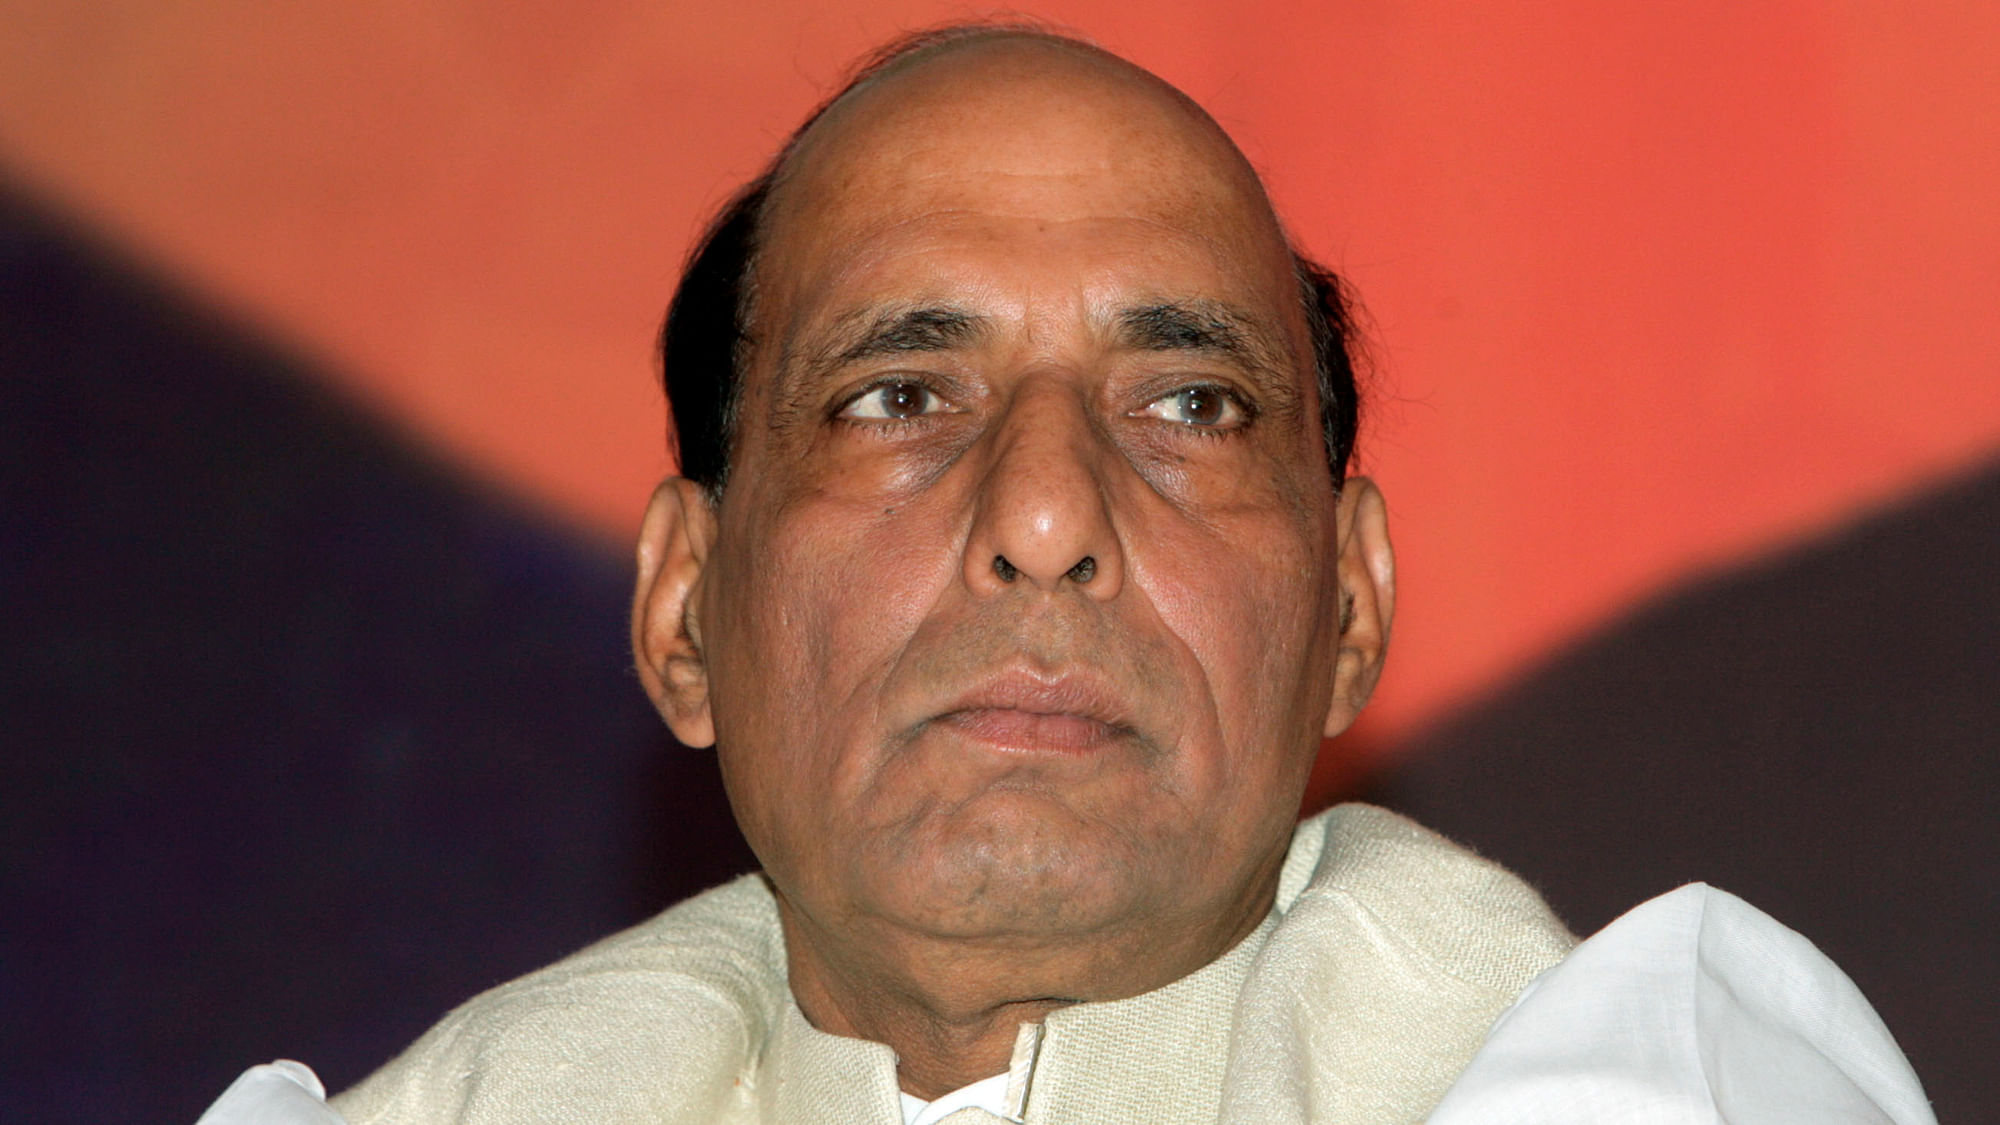 Singh also said the Narendra Modi government has achieved success in Maoist-affected states in its tenure. File image of Union Home Minister Rajnath Singh. (Photo: Reuters)